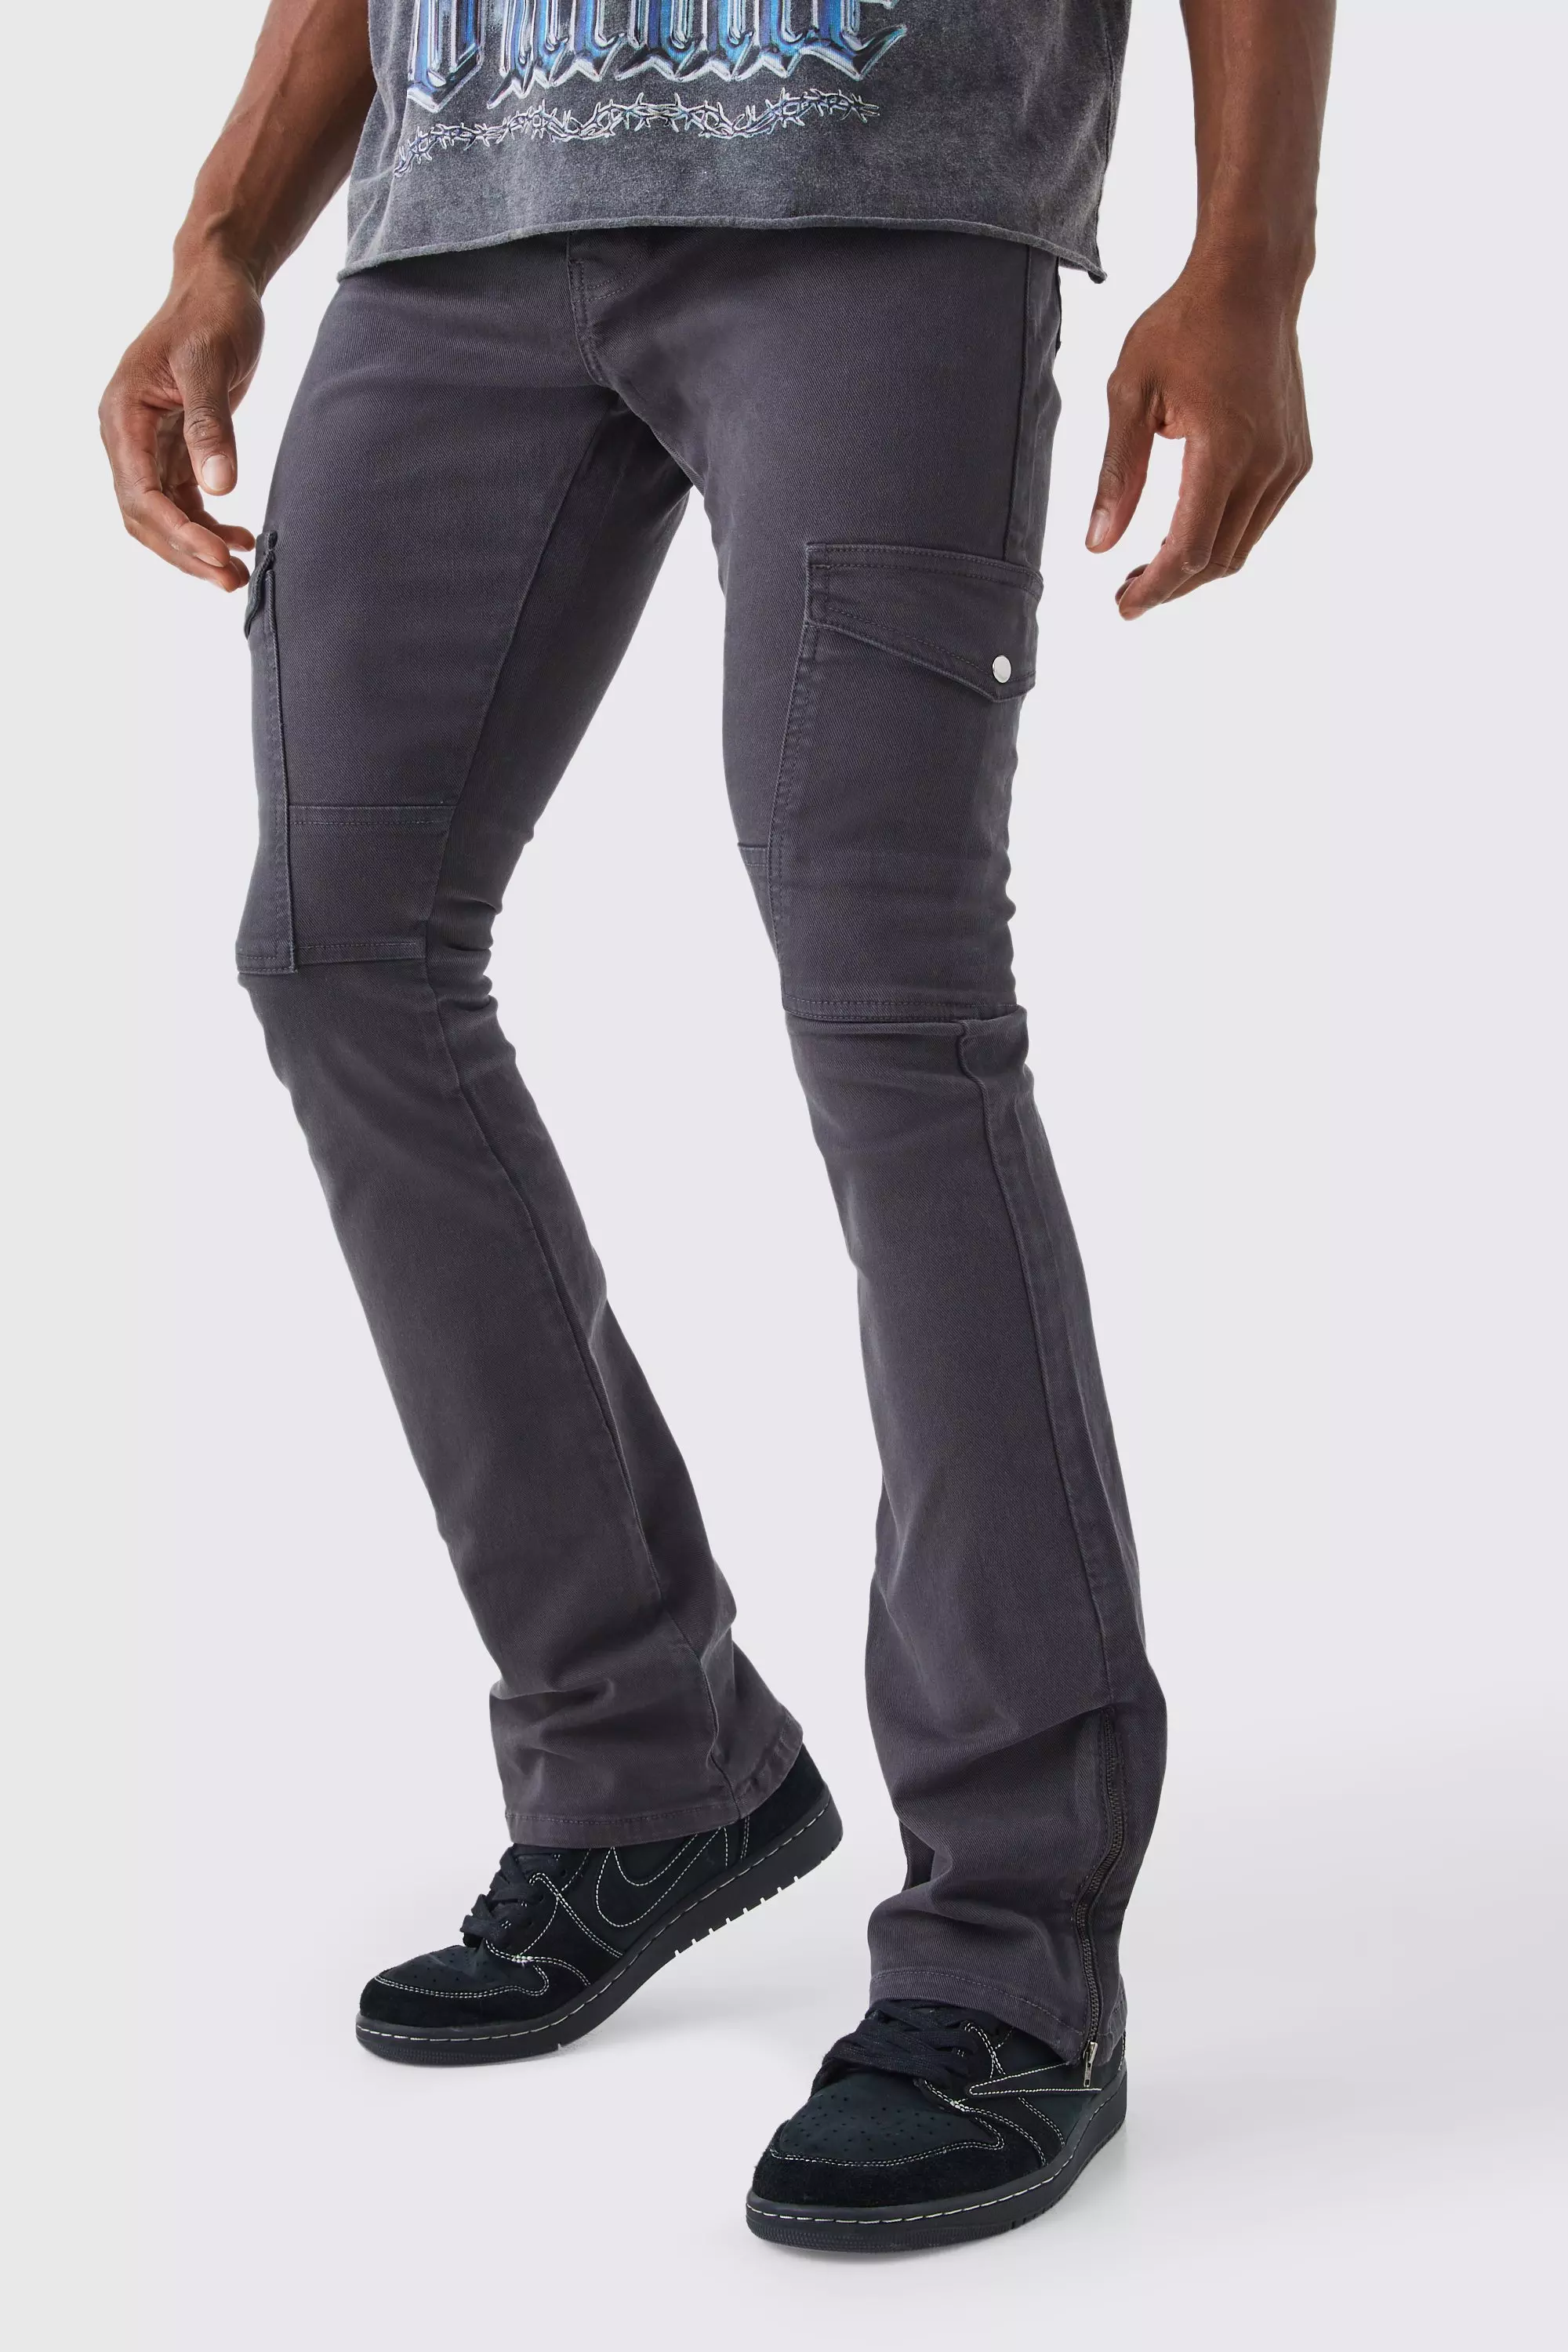 Fixed Waist Skinny Stacked Zip Gusset Cargo Pants Charcoal